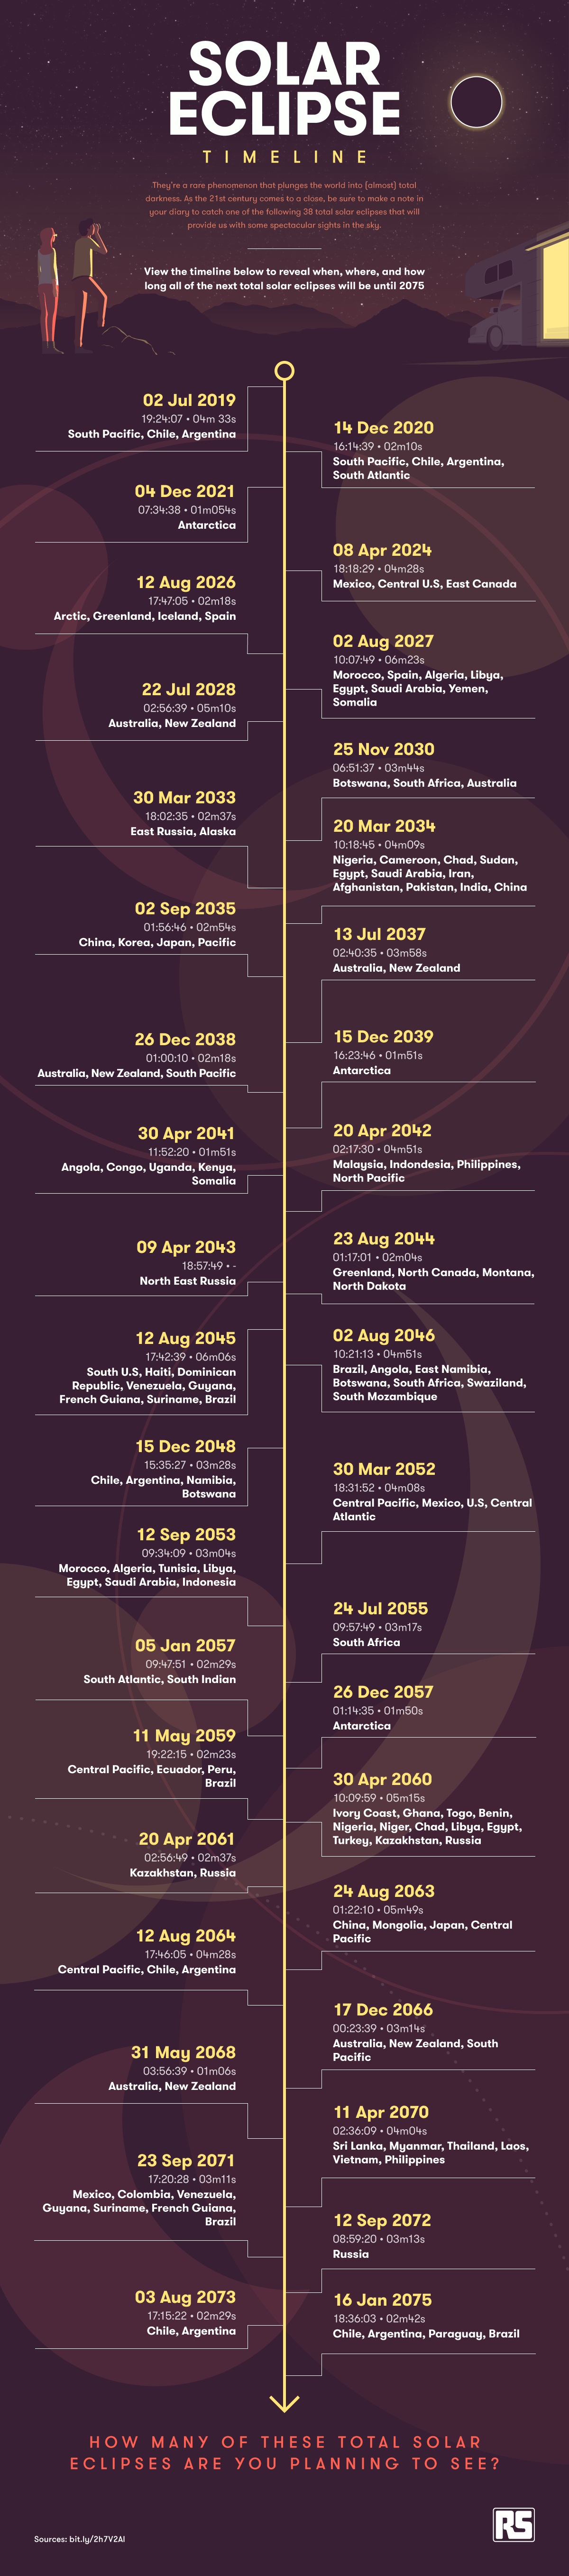 List Of Total Solar Eclipses Through 2075 Science 2.0